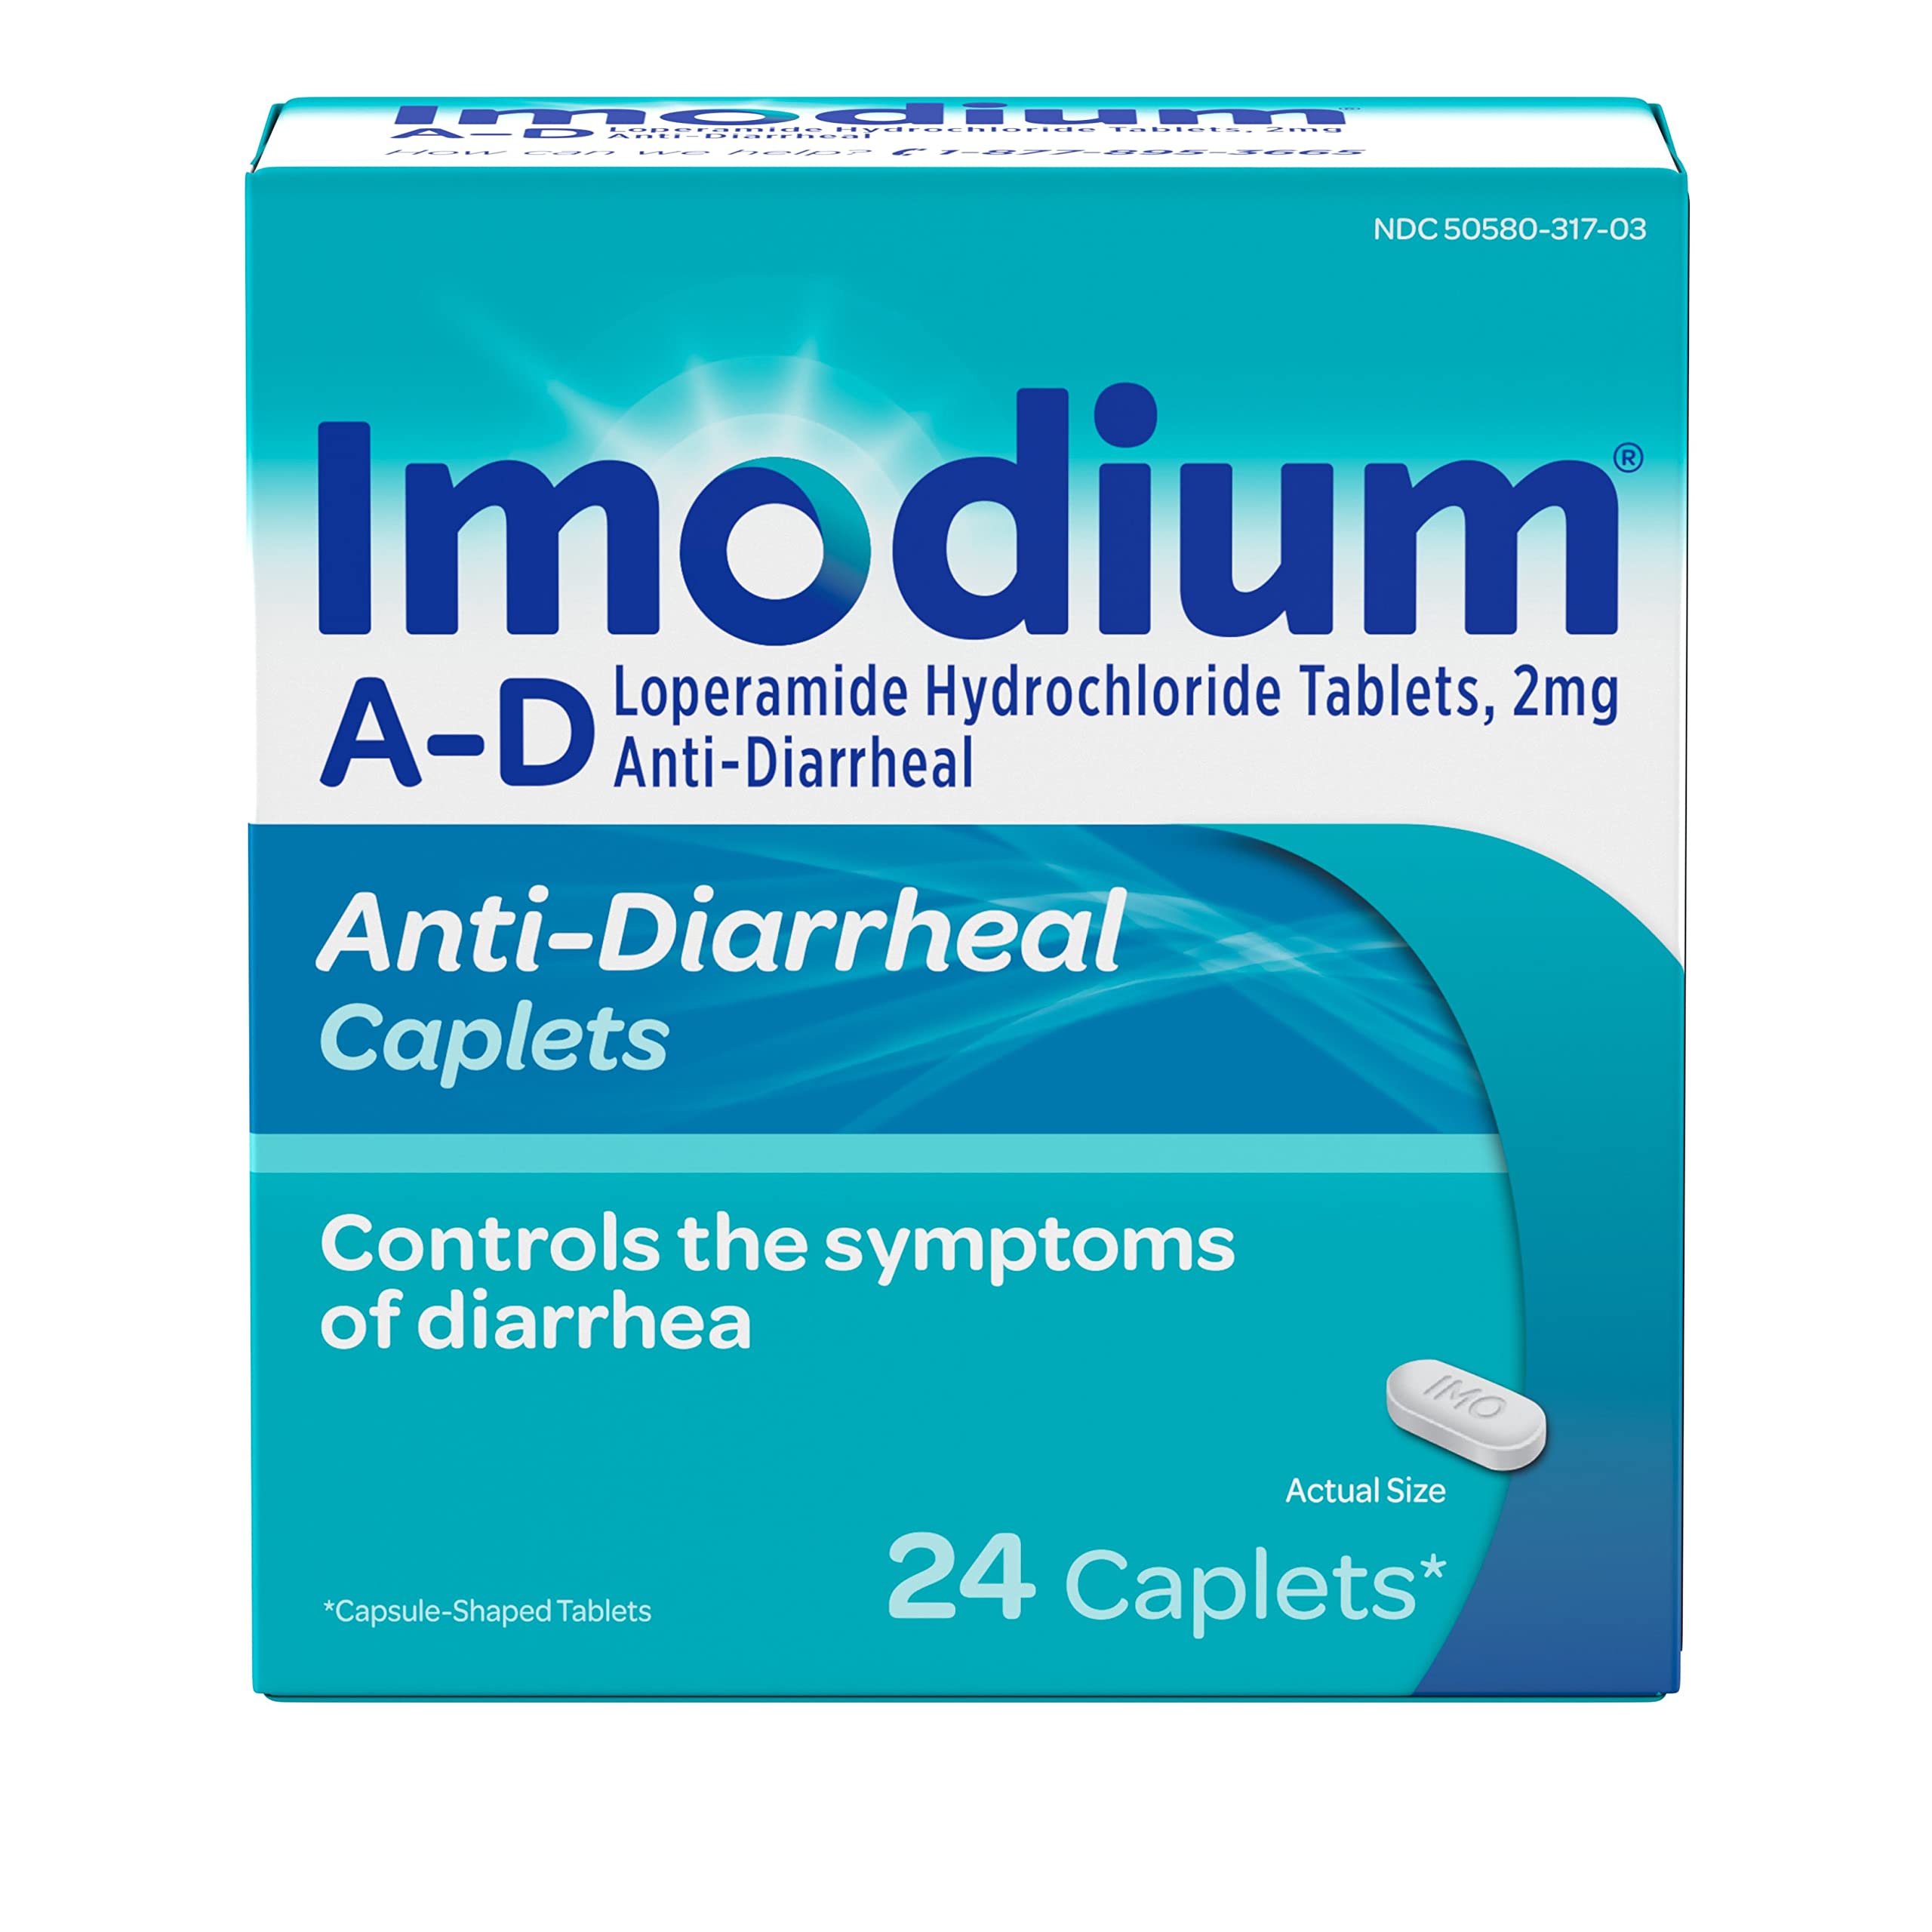 Immodium for those who need it...less than $11 dollars a box of 24 pills.